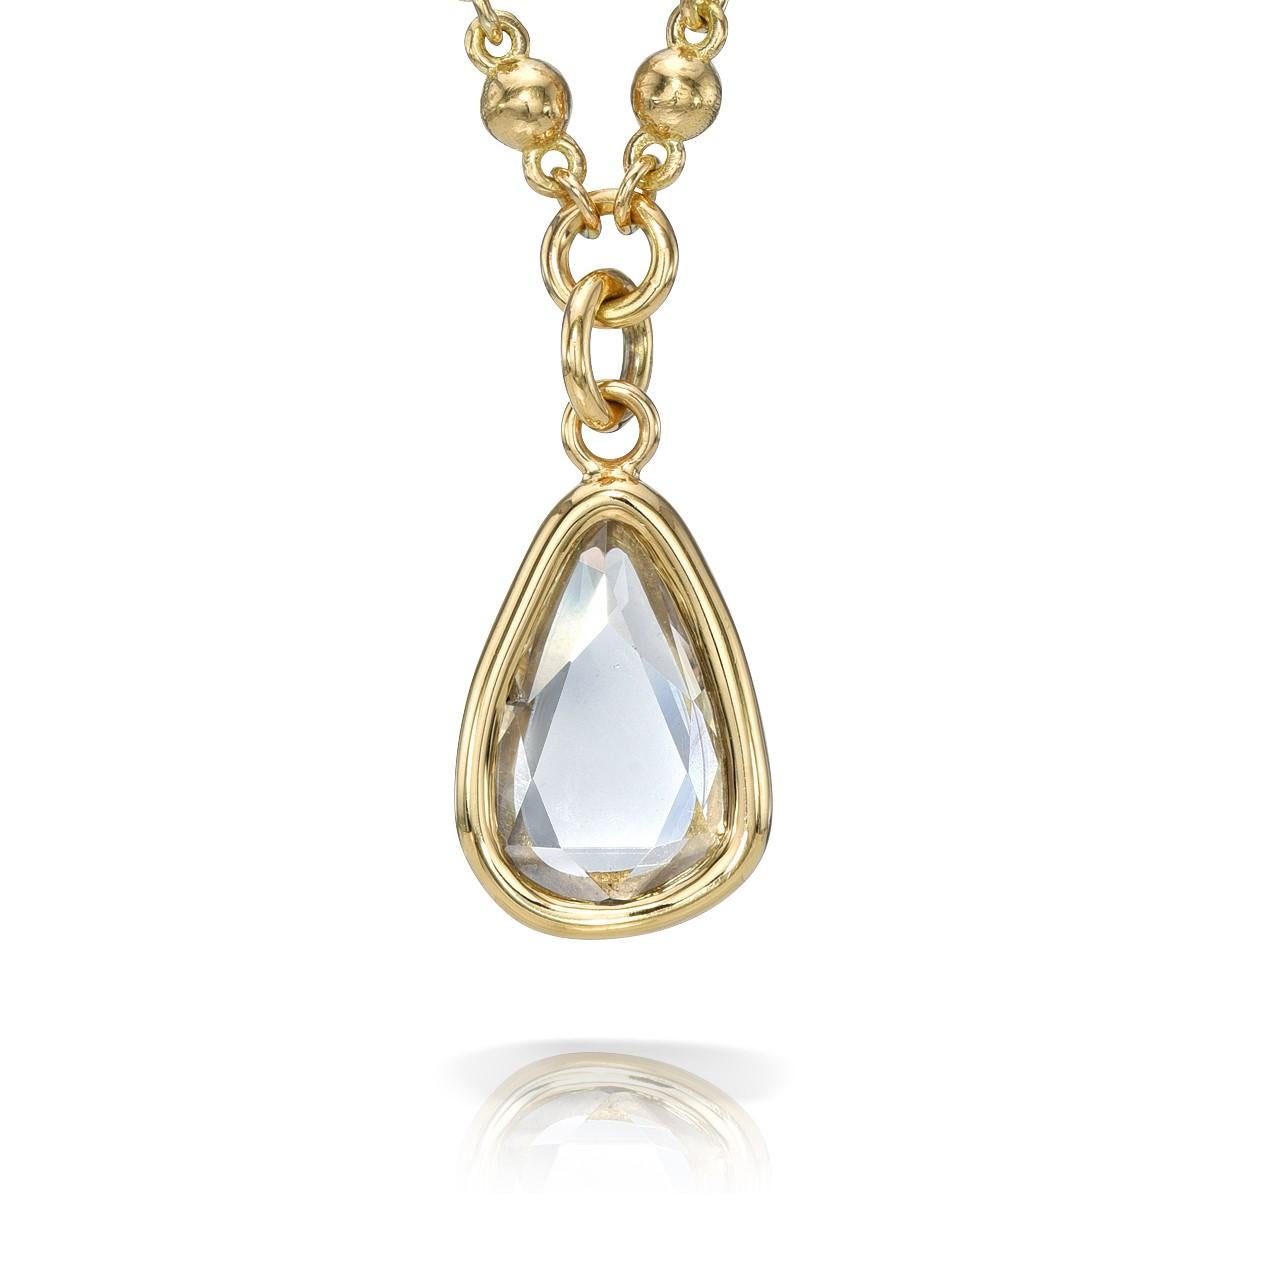 2.39ct N/I1 GIA certified vintage pear shaped rose cut diamond bezel set on a handcrafted 18K yellow gold pendant necklace.

Necklace measures 17